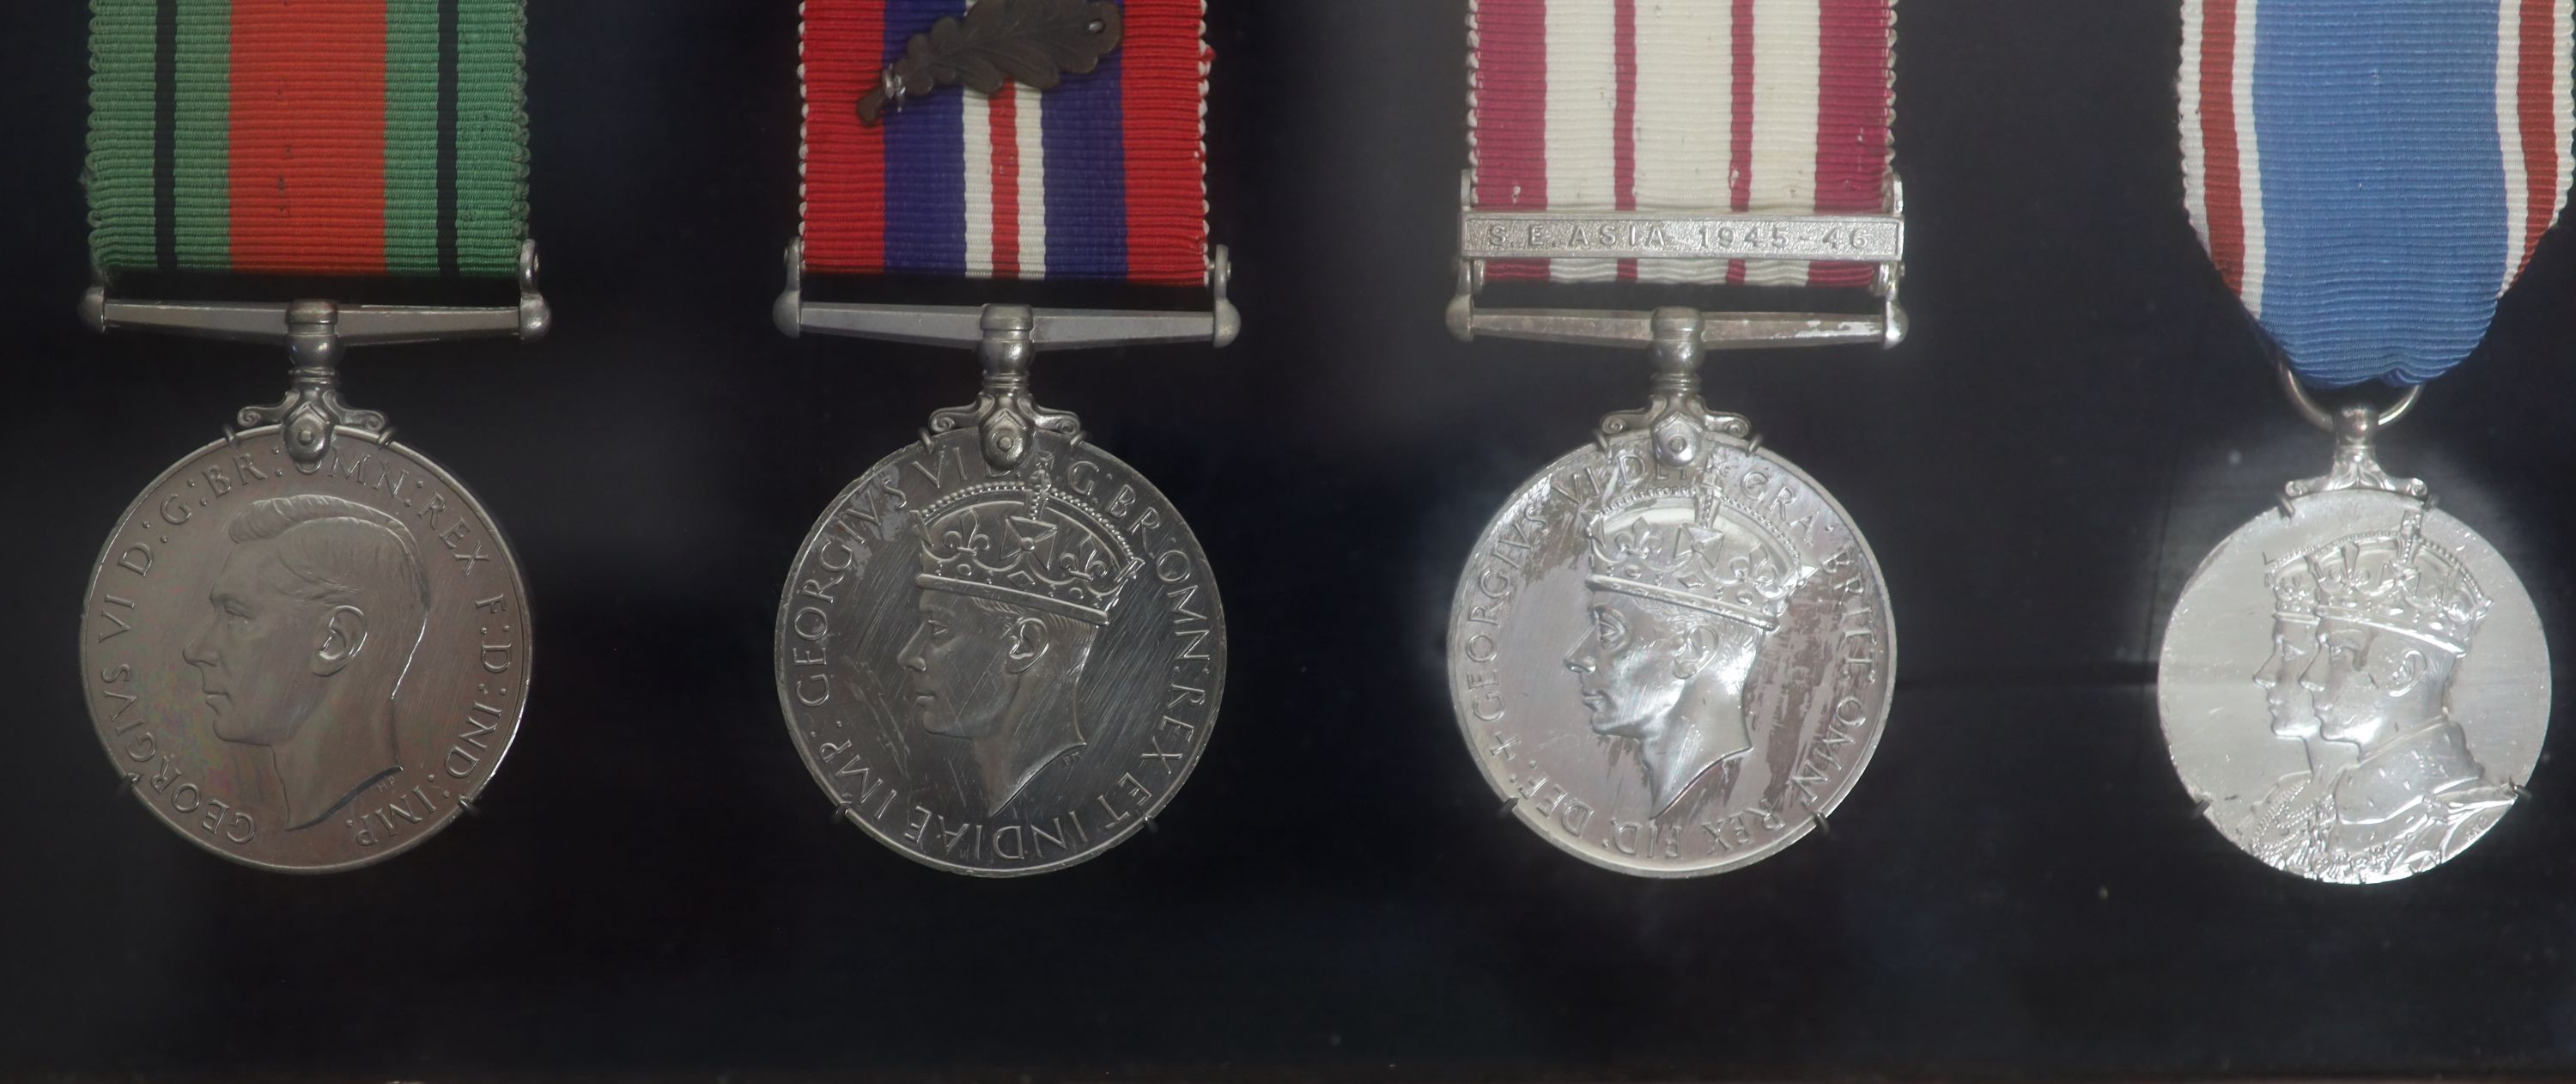 A cased WWI, WWII and Military C.B. medal group to Rear-Admiral John Dent R.N. (1899-1973) and a cased KCVO and Order of St. John to his son Sir Robin John Dent (1929-1999) Case 45.5 x 36 cm